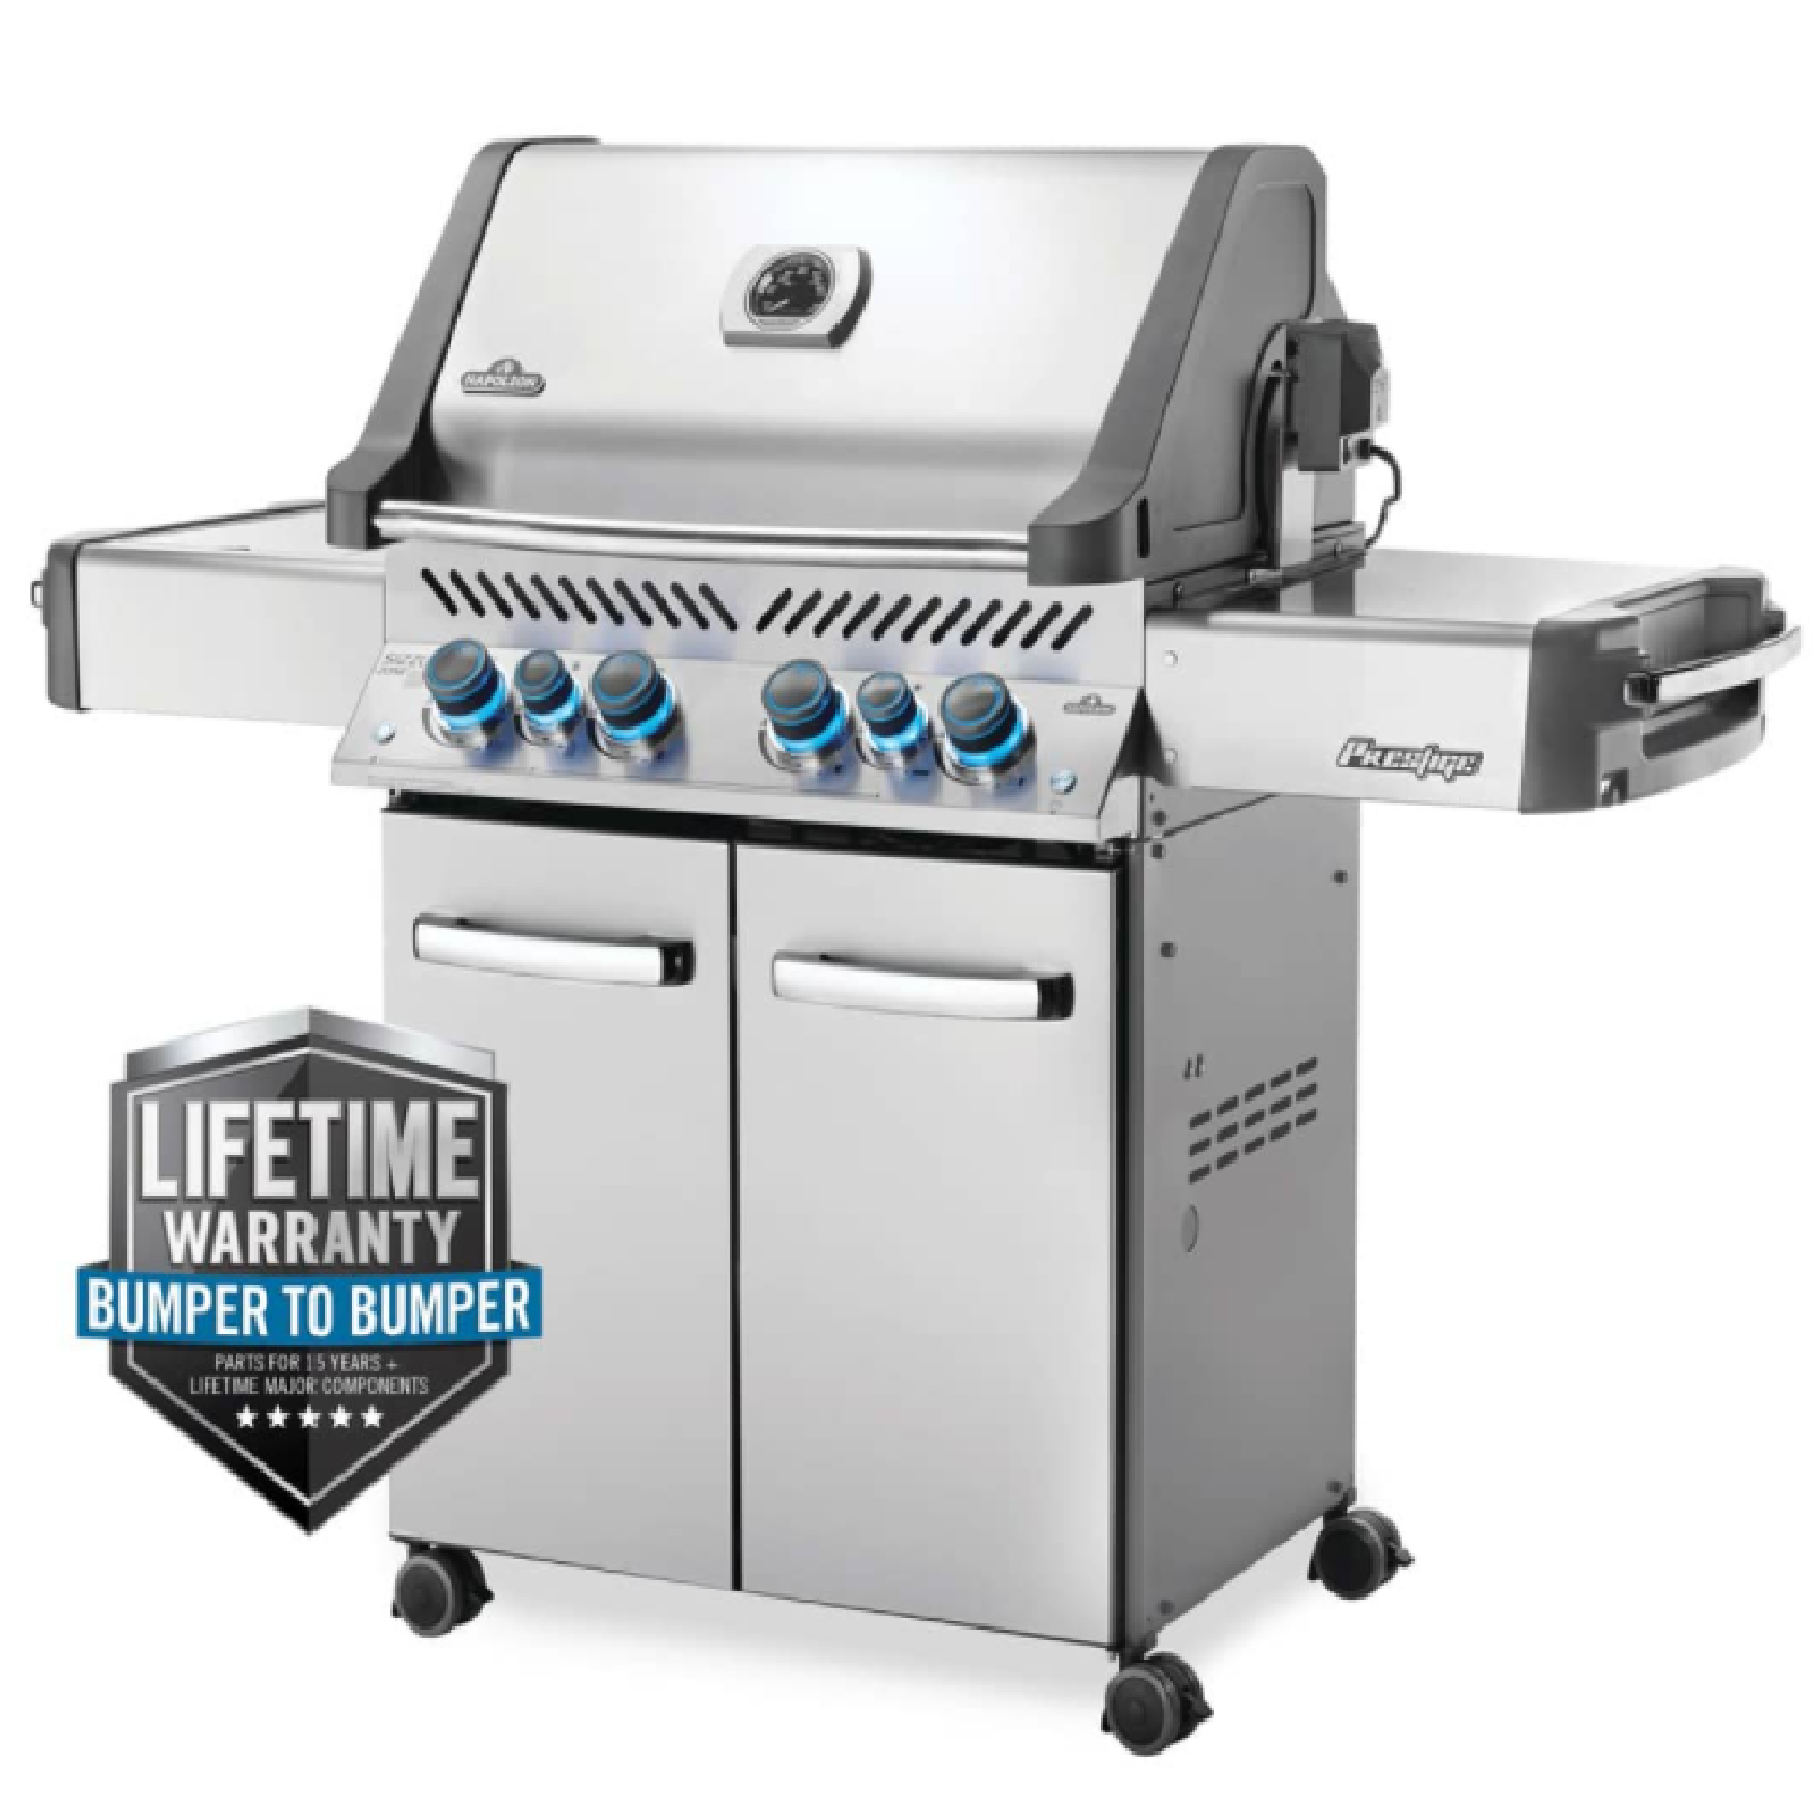 Napoleon Prestige 500 Propane Gas Grill with Infrared Side And Rear Burners